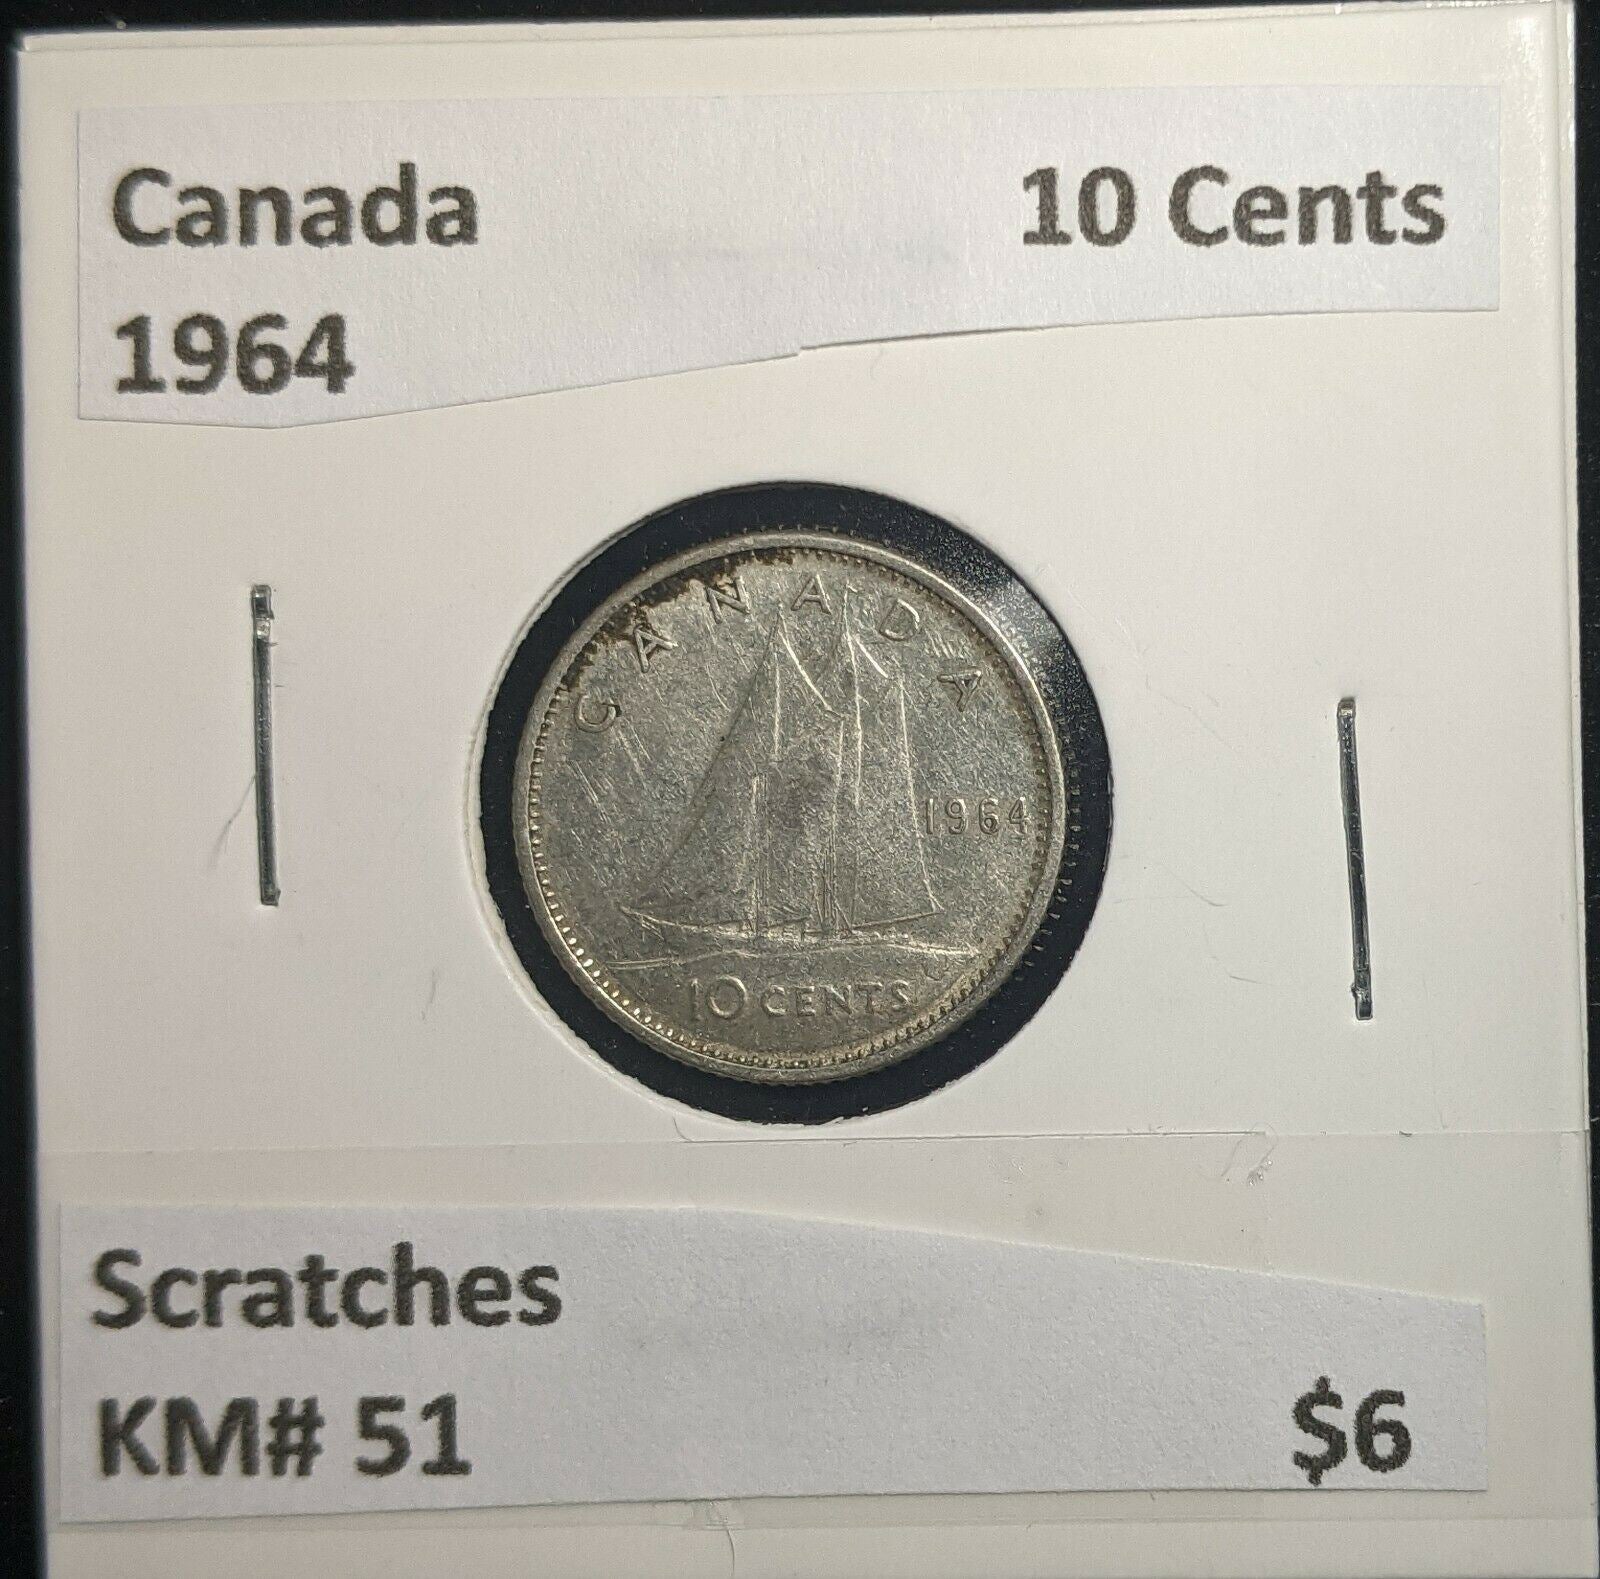 Canada 1964 10 Cents KM# 51 Scratches #030